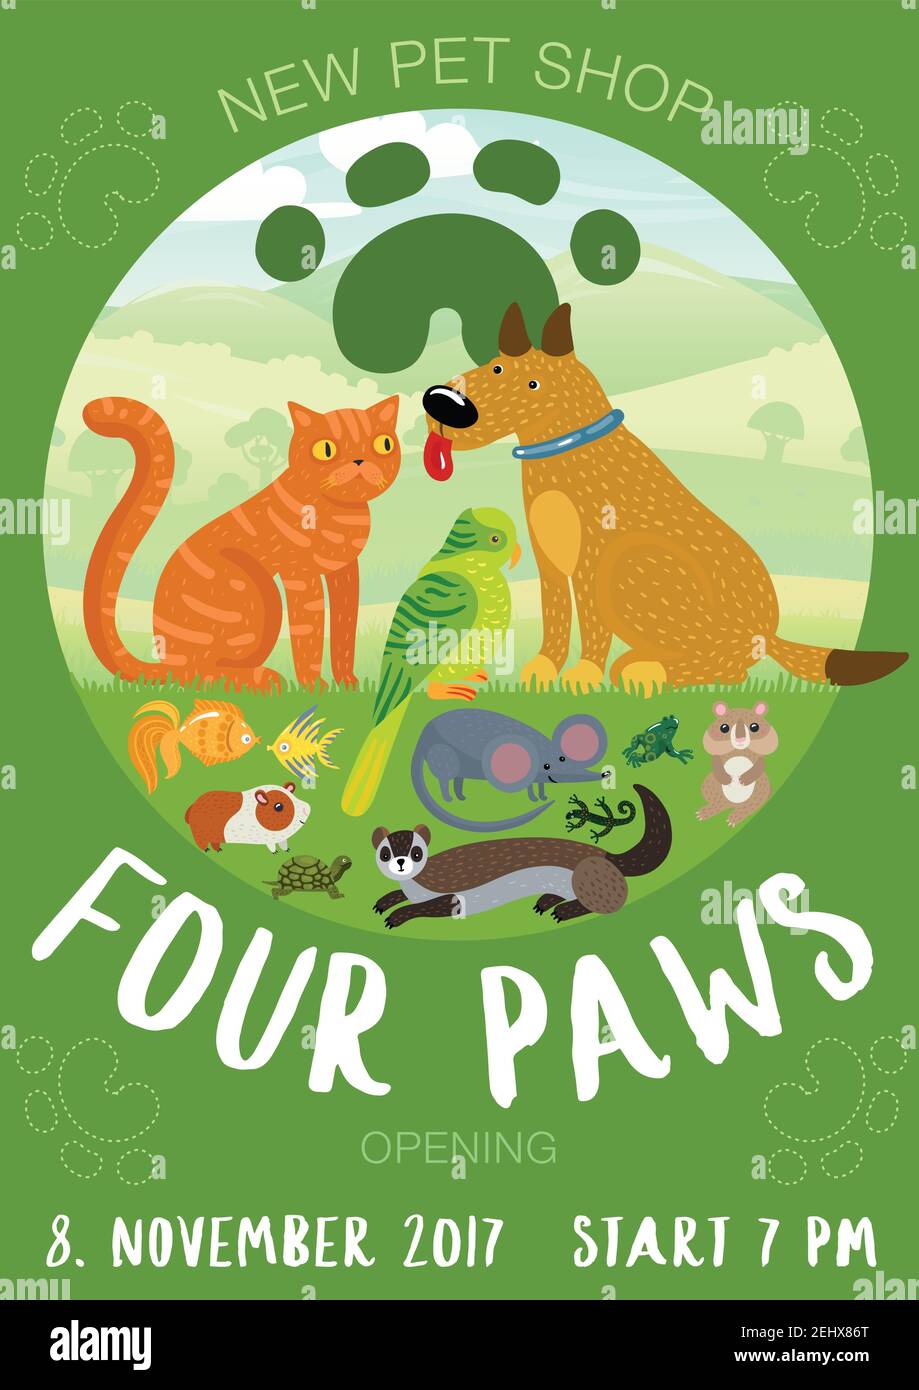 Pet shop advertising poster with paw prints, cat and dog, fishes, rodents on green background vector illustration Stock Vector